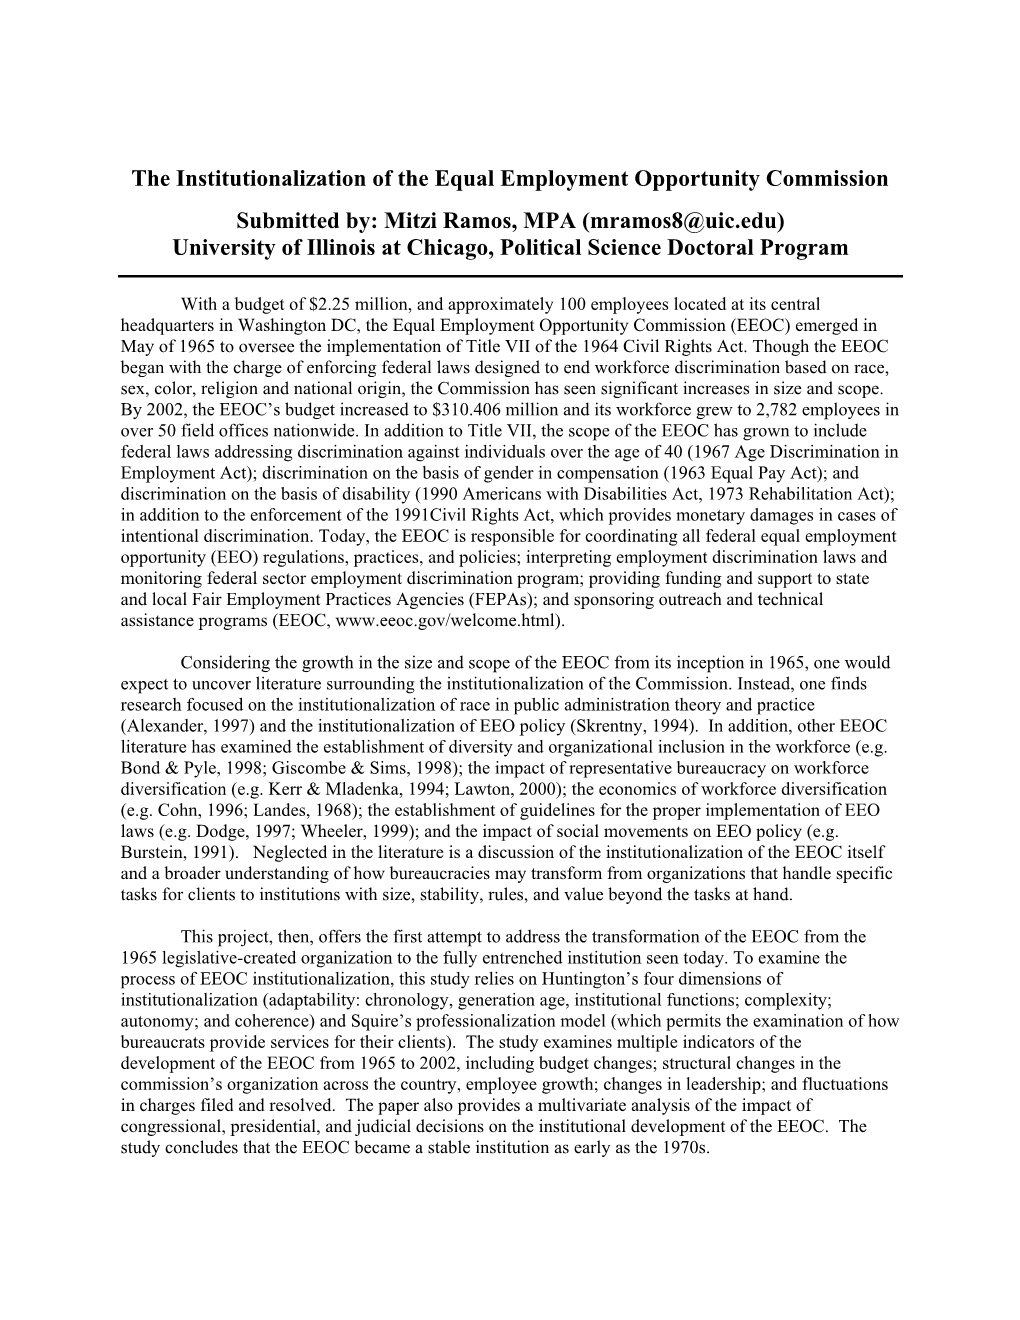 The Institutionalization of the Equal Employment Opportunity Commission